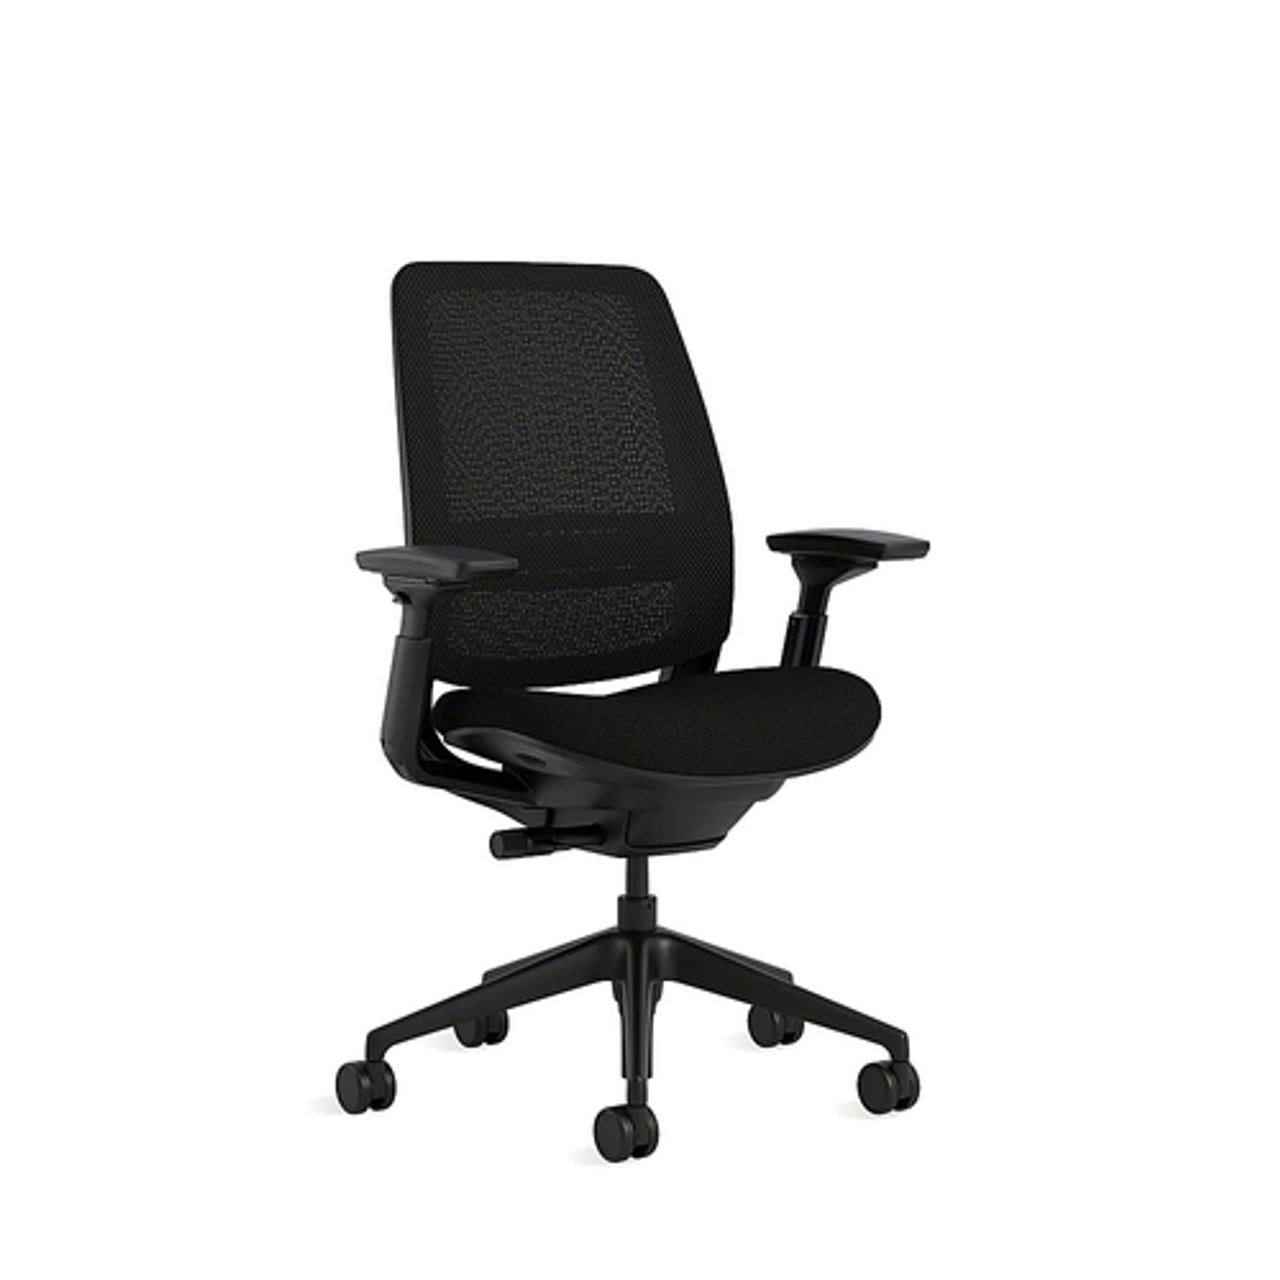 Steelcase Series 2 3D Airback Chair with Black Frame in Onyx Fabric and Licorice Mesh with Carpet Casters